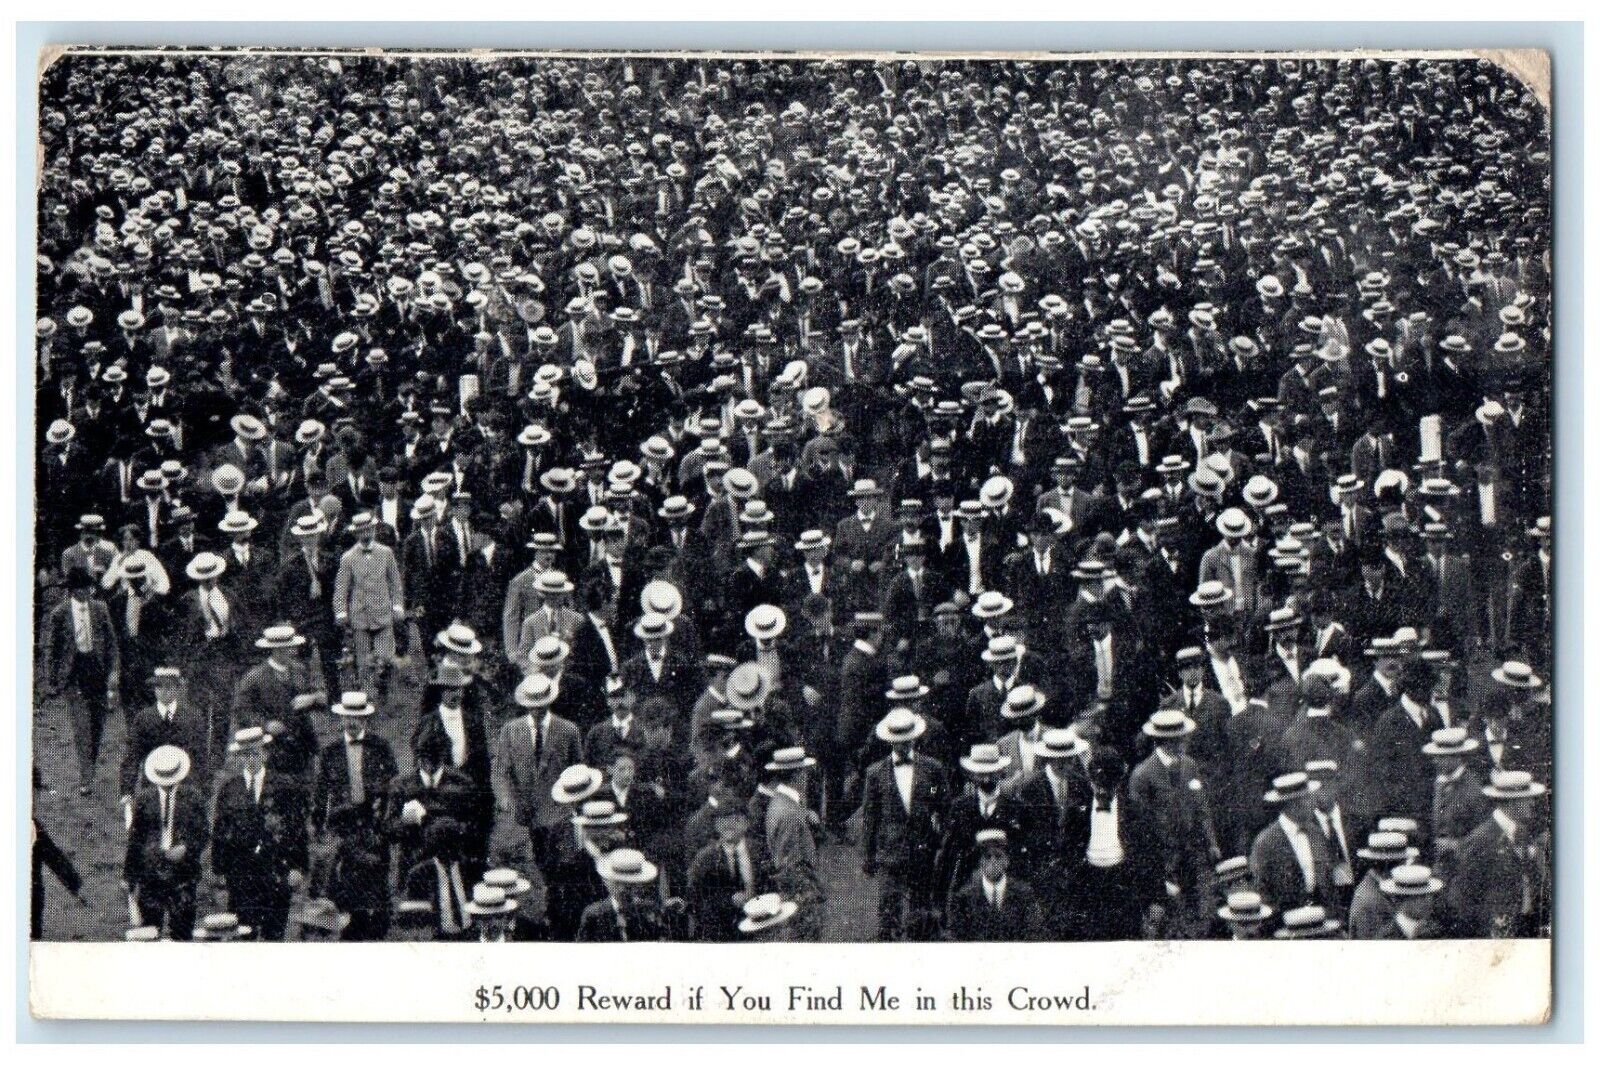 1987 Crowded People Find Me In This Crows Where's Waldo RPPC Photo Postcard